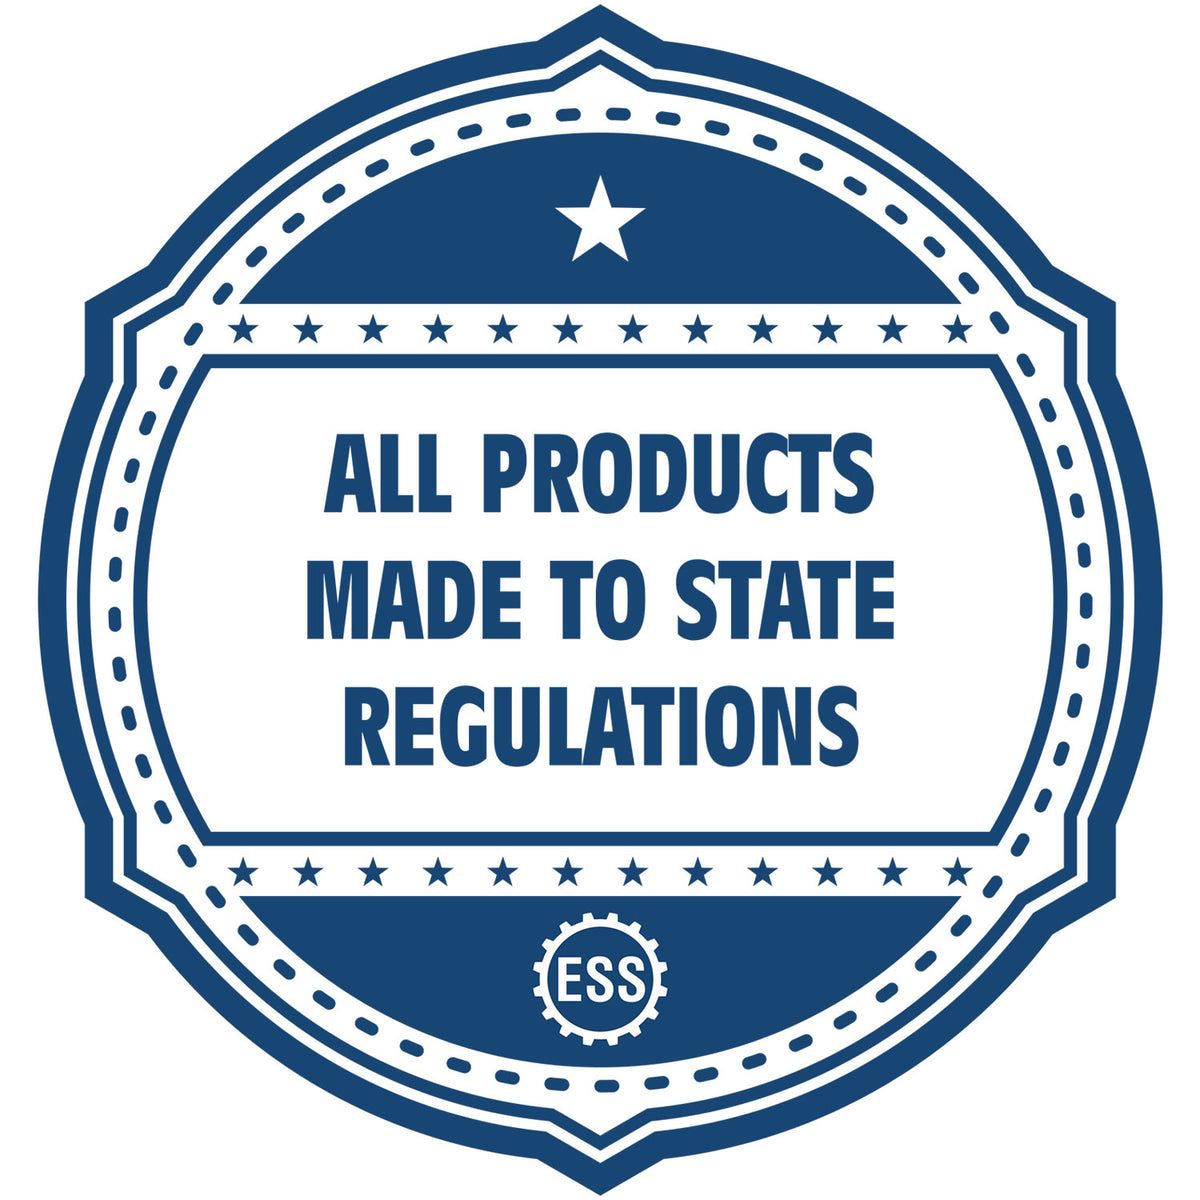 An icon or badge element for the Slim Pre-Inked Maryland Land Surveyor Seal Stamp showing that this product is made in compliance with state regulations.